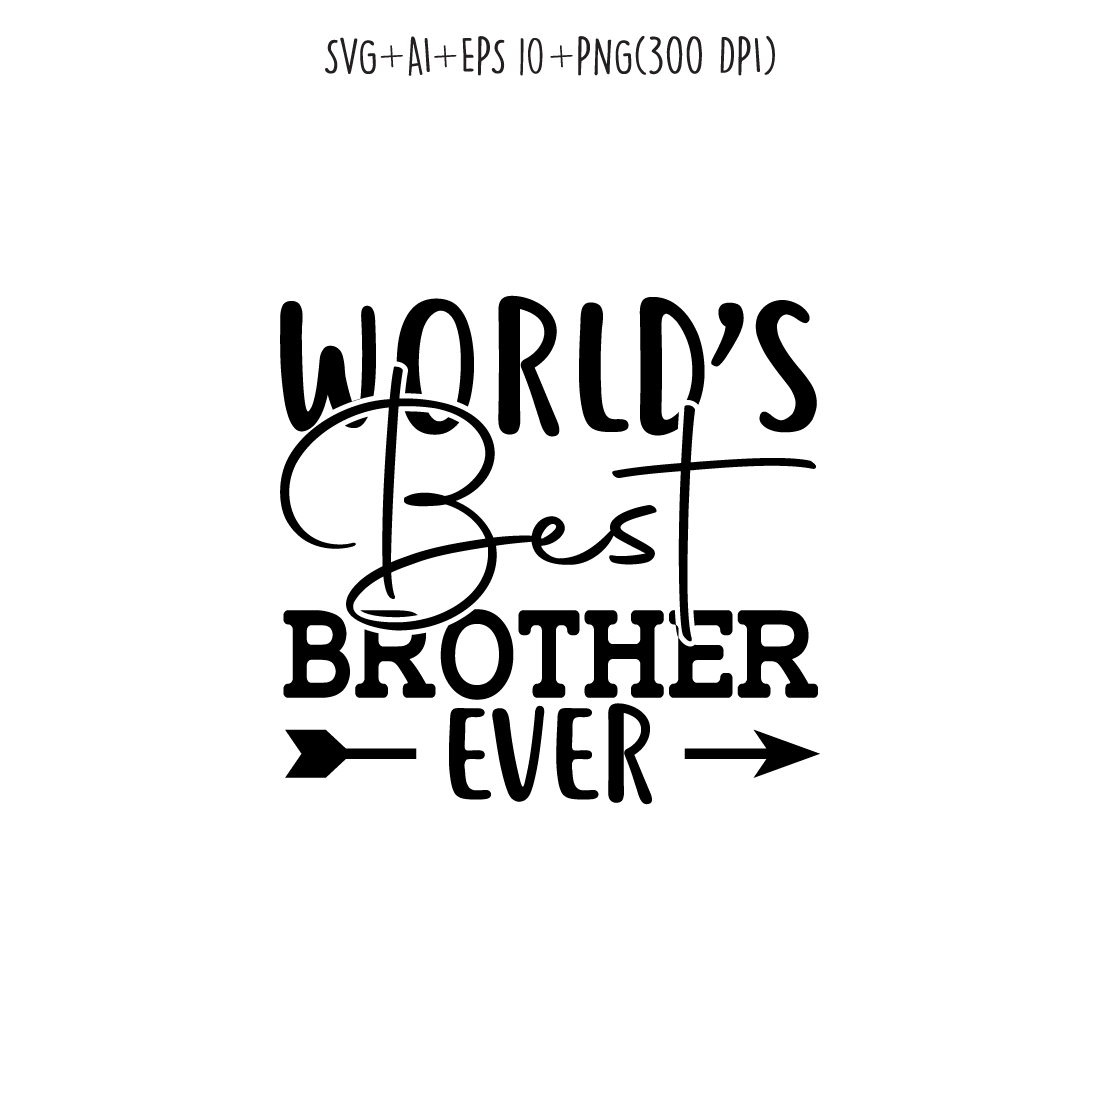 world's best brother ever SVG design for t-shirts, cards, frame artwork, phone cases, bags, mugs, stickers, tumblers, print, etc preview image.